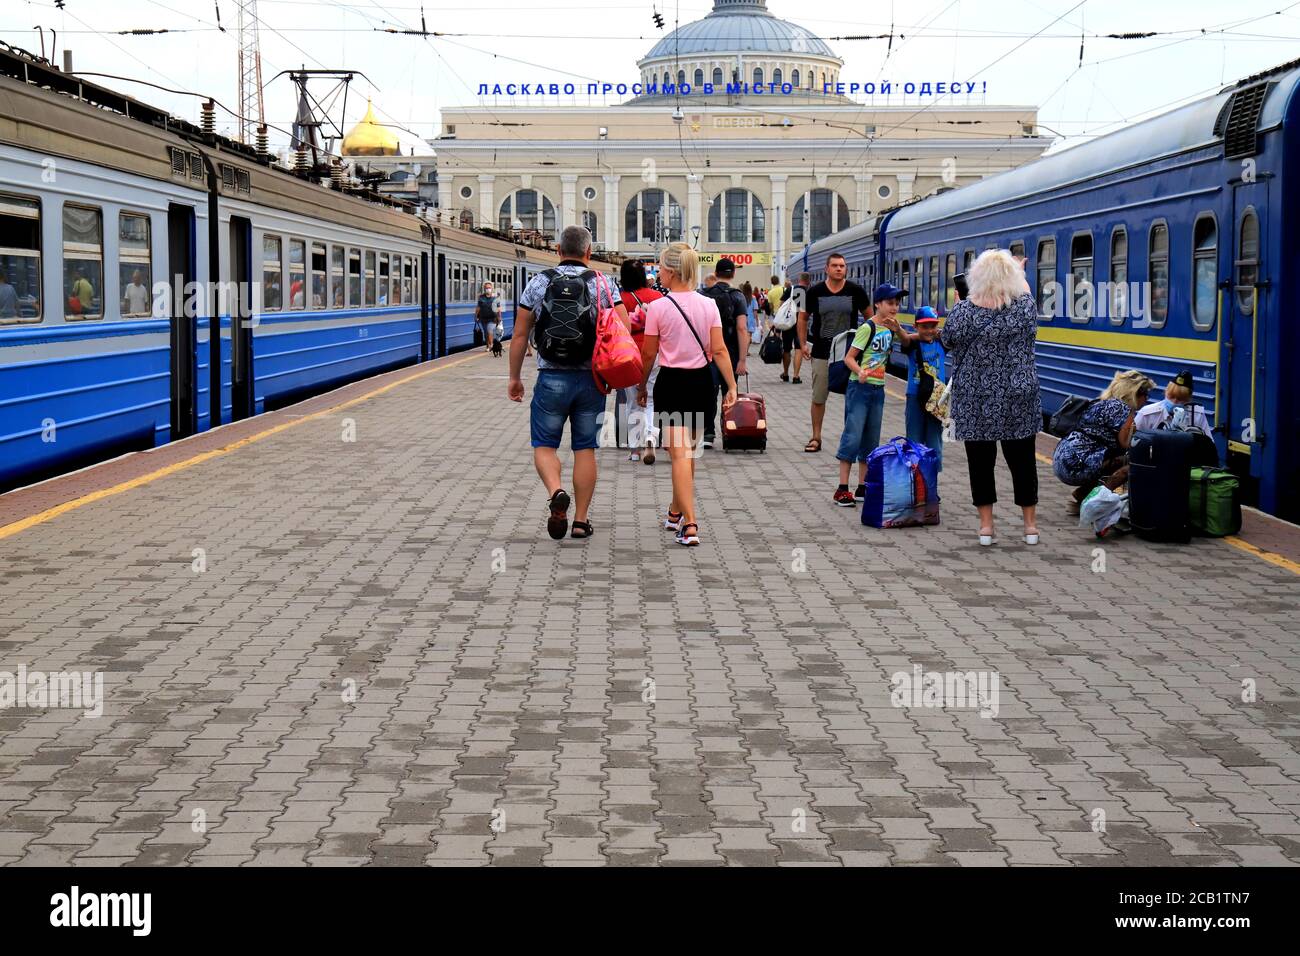 Odesa, Ukraine. 27 07 2020 A crowd of people walking along the platform with bags, suitcases and luggage at the Odessa railway station. Tourists Stock Photo